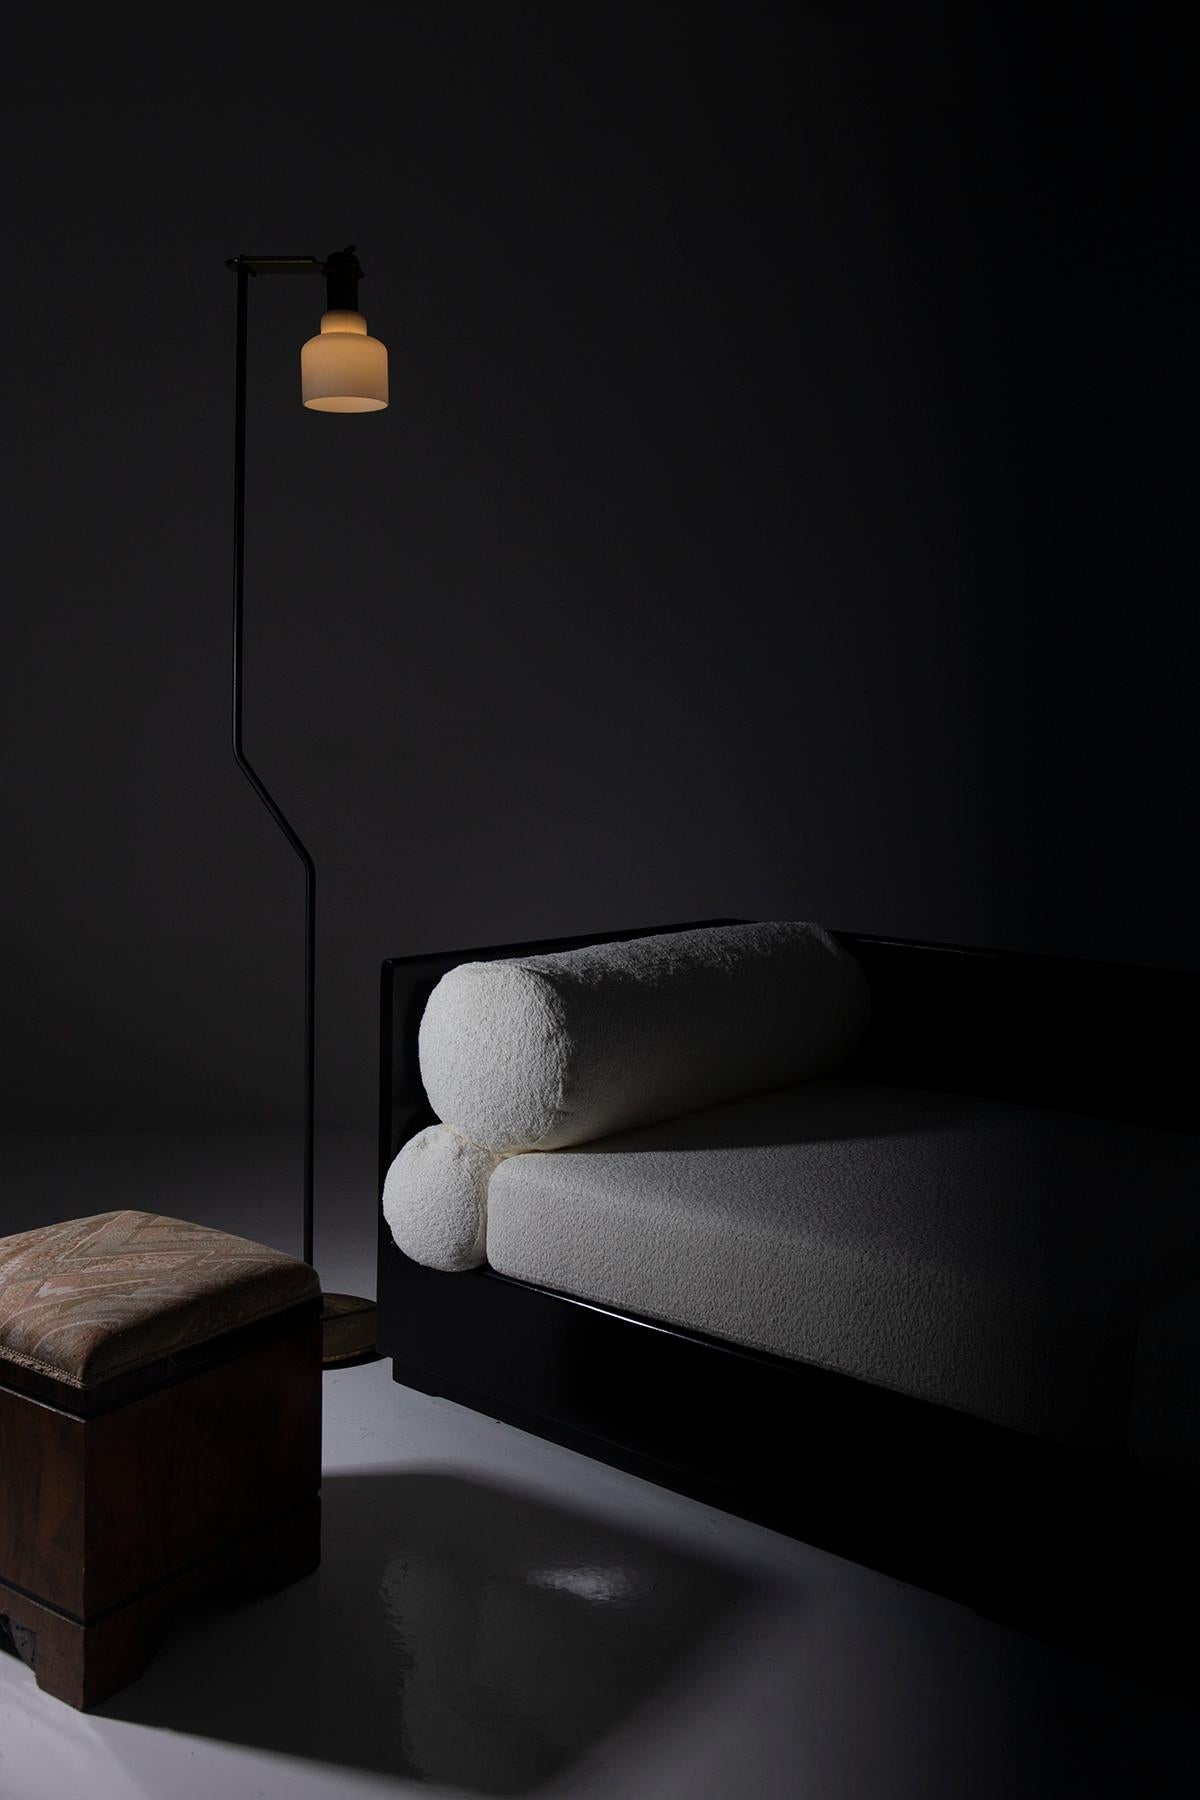 The 1950s Italian floor lamp attributed to the OLUCE manufacture is a beacon of design and functionality, a monument to ingenuity and aesthetics that illuminates not only physical spaces but also those of the imagination. This lamp is like a poem of